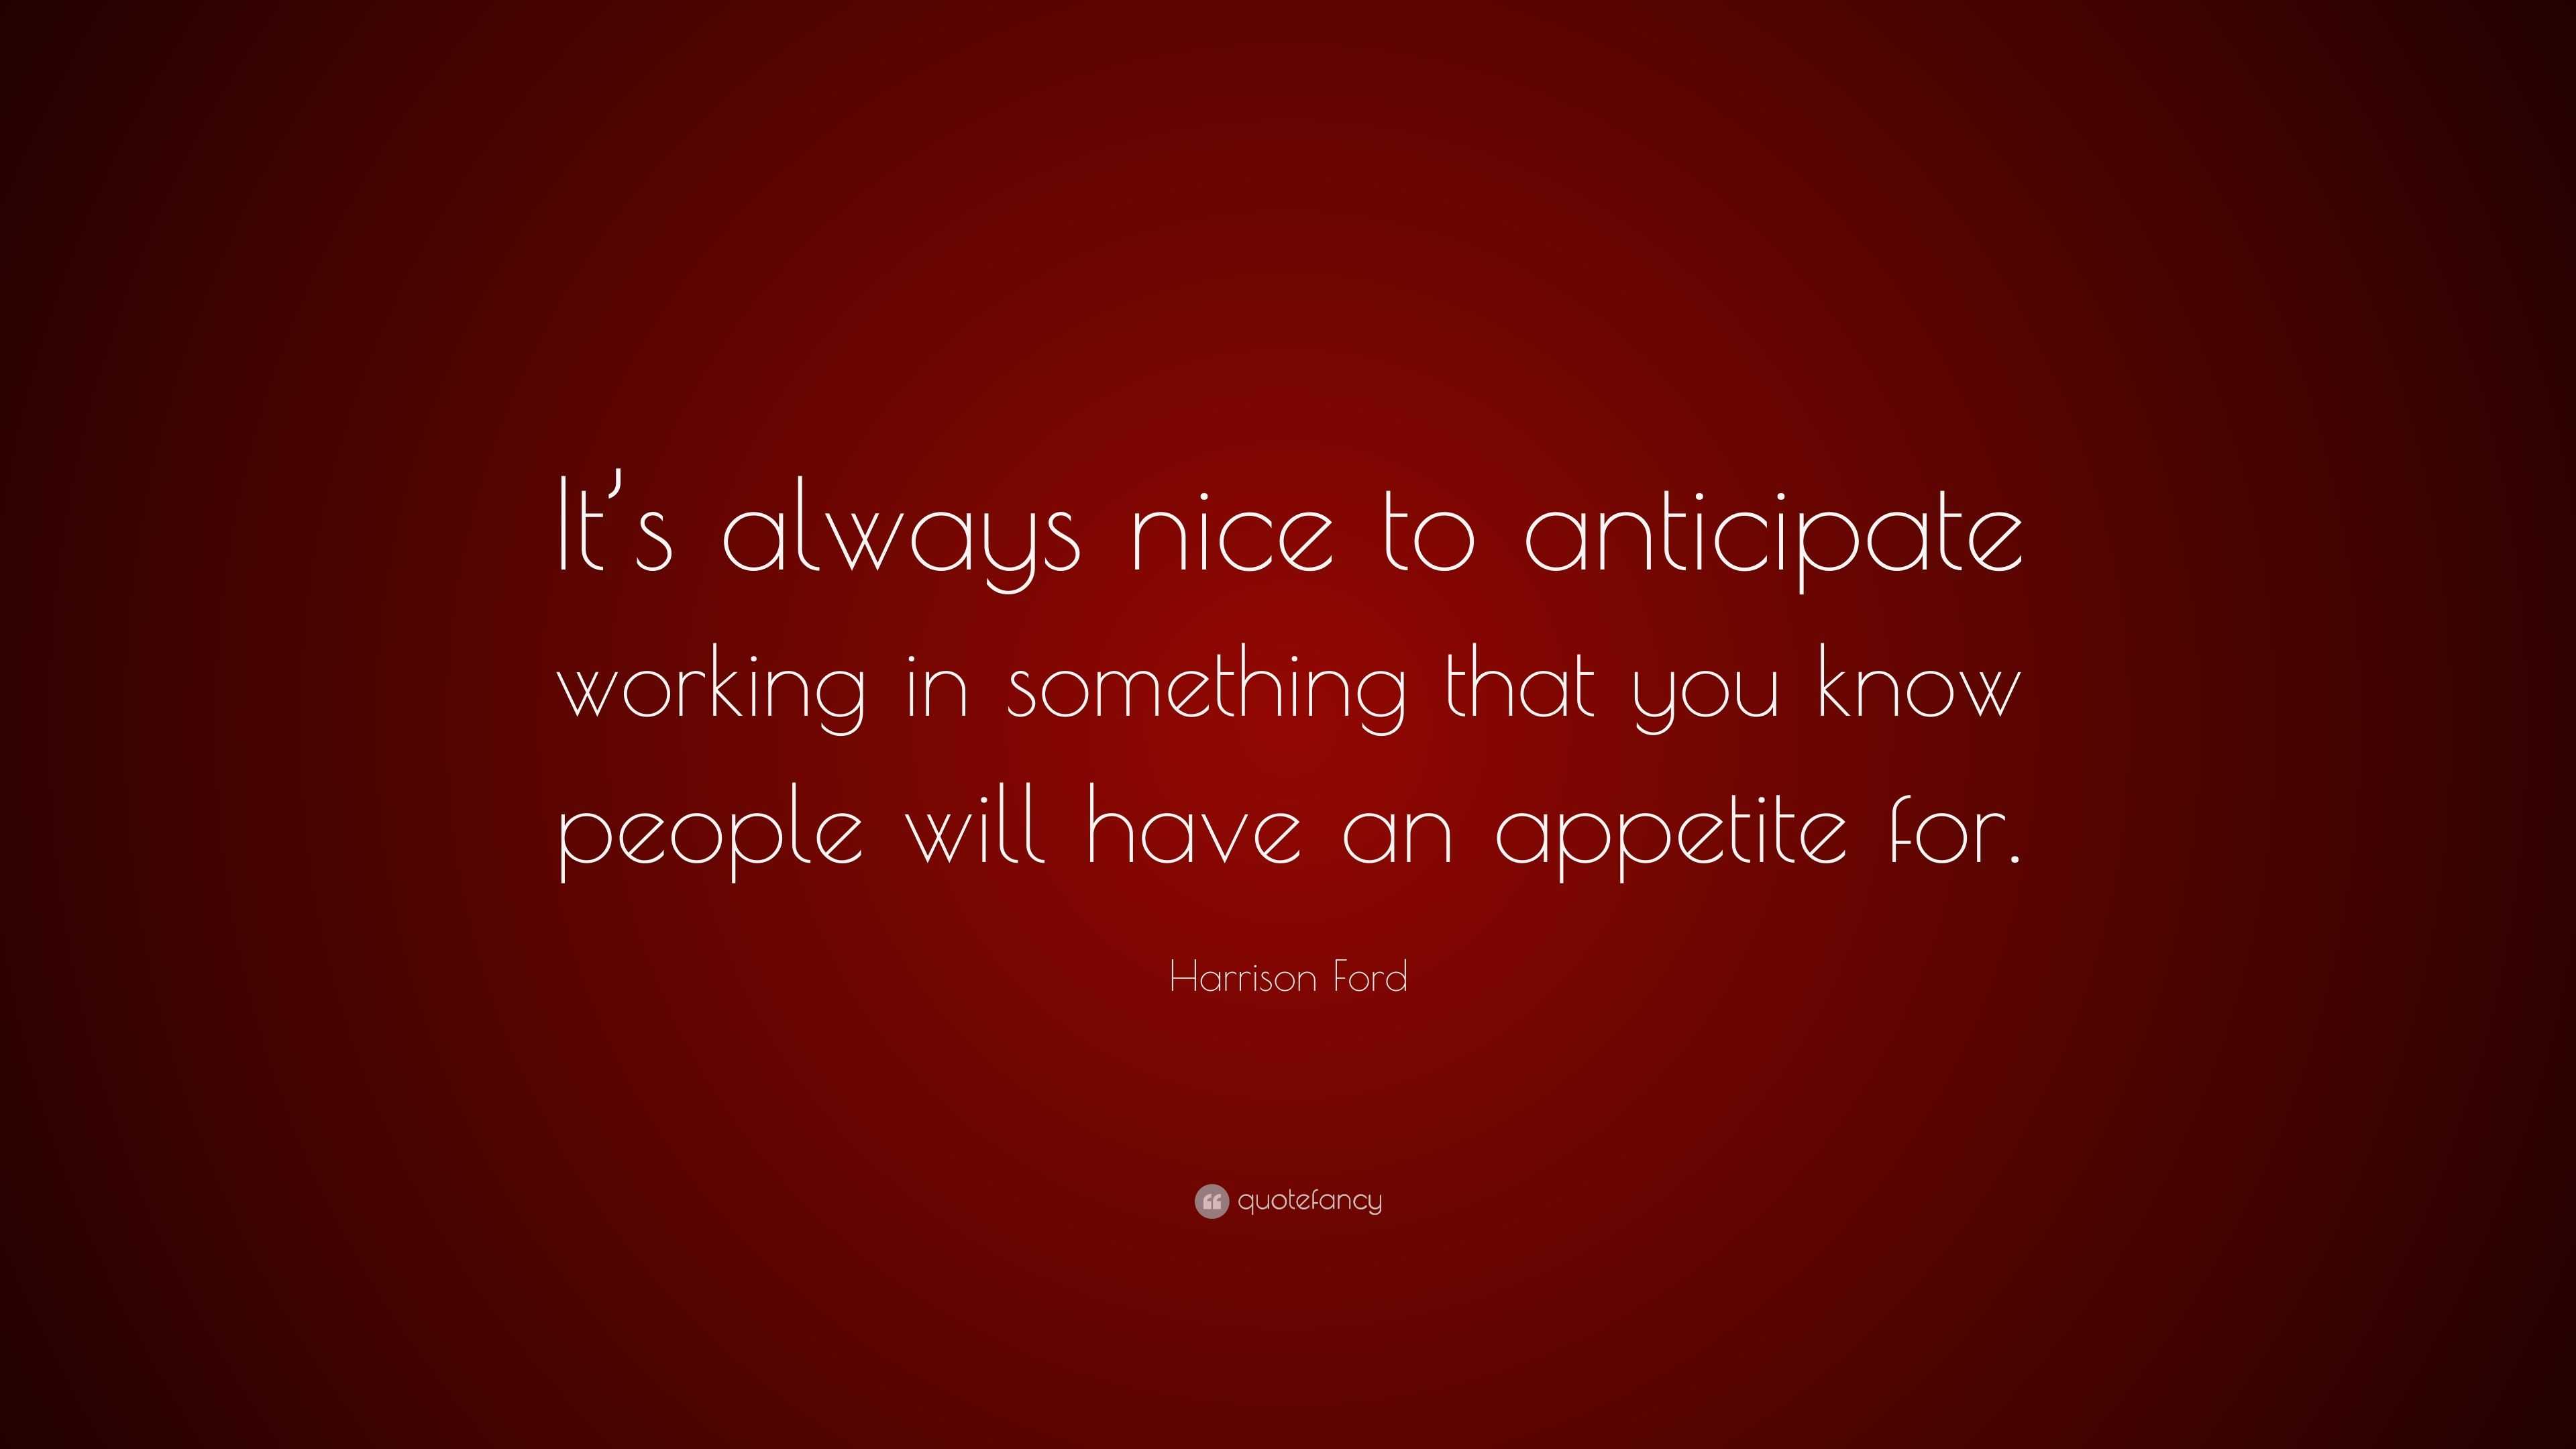 Harrison Ford Quote “it’s Always Nice To Anticipate Working In Something That You Know People